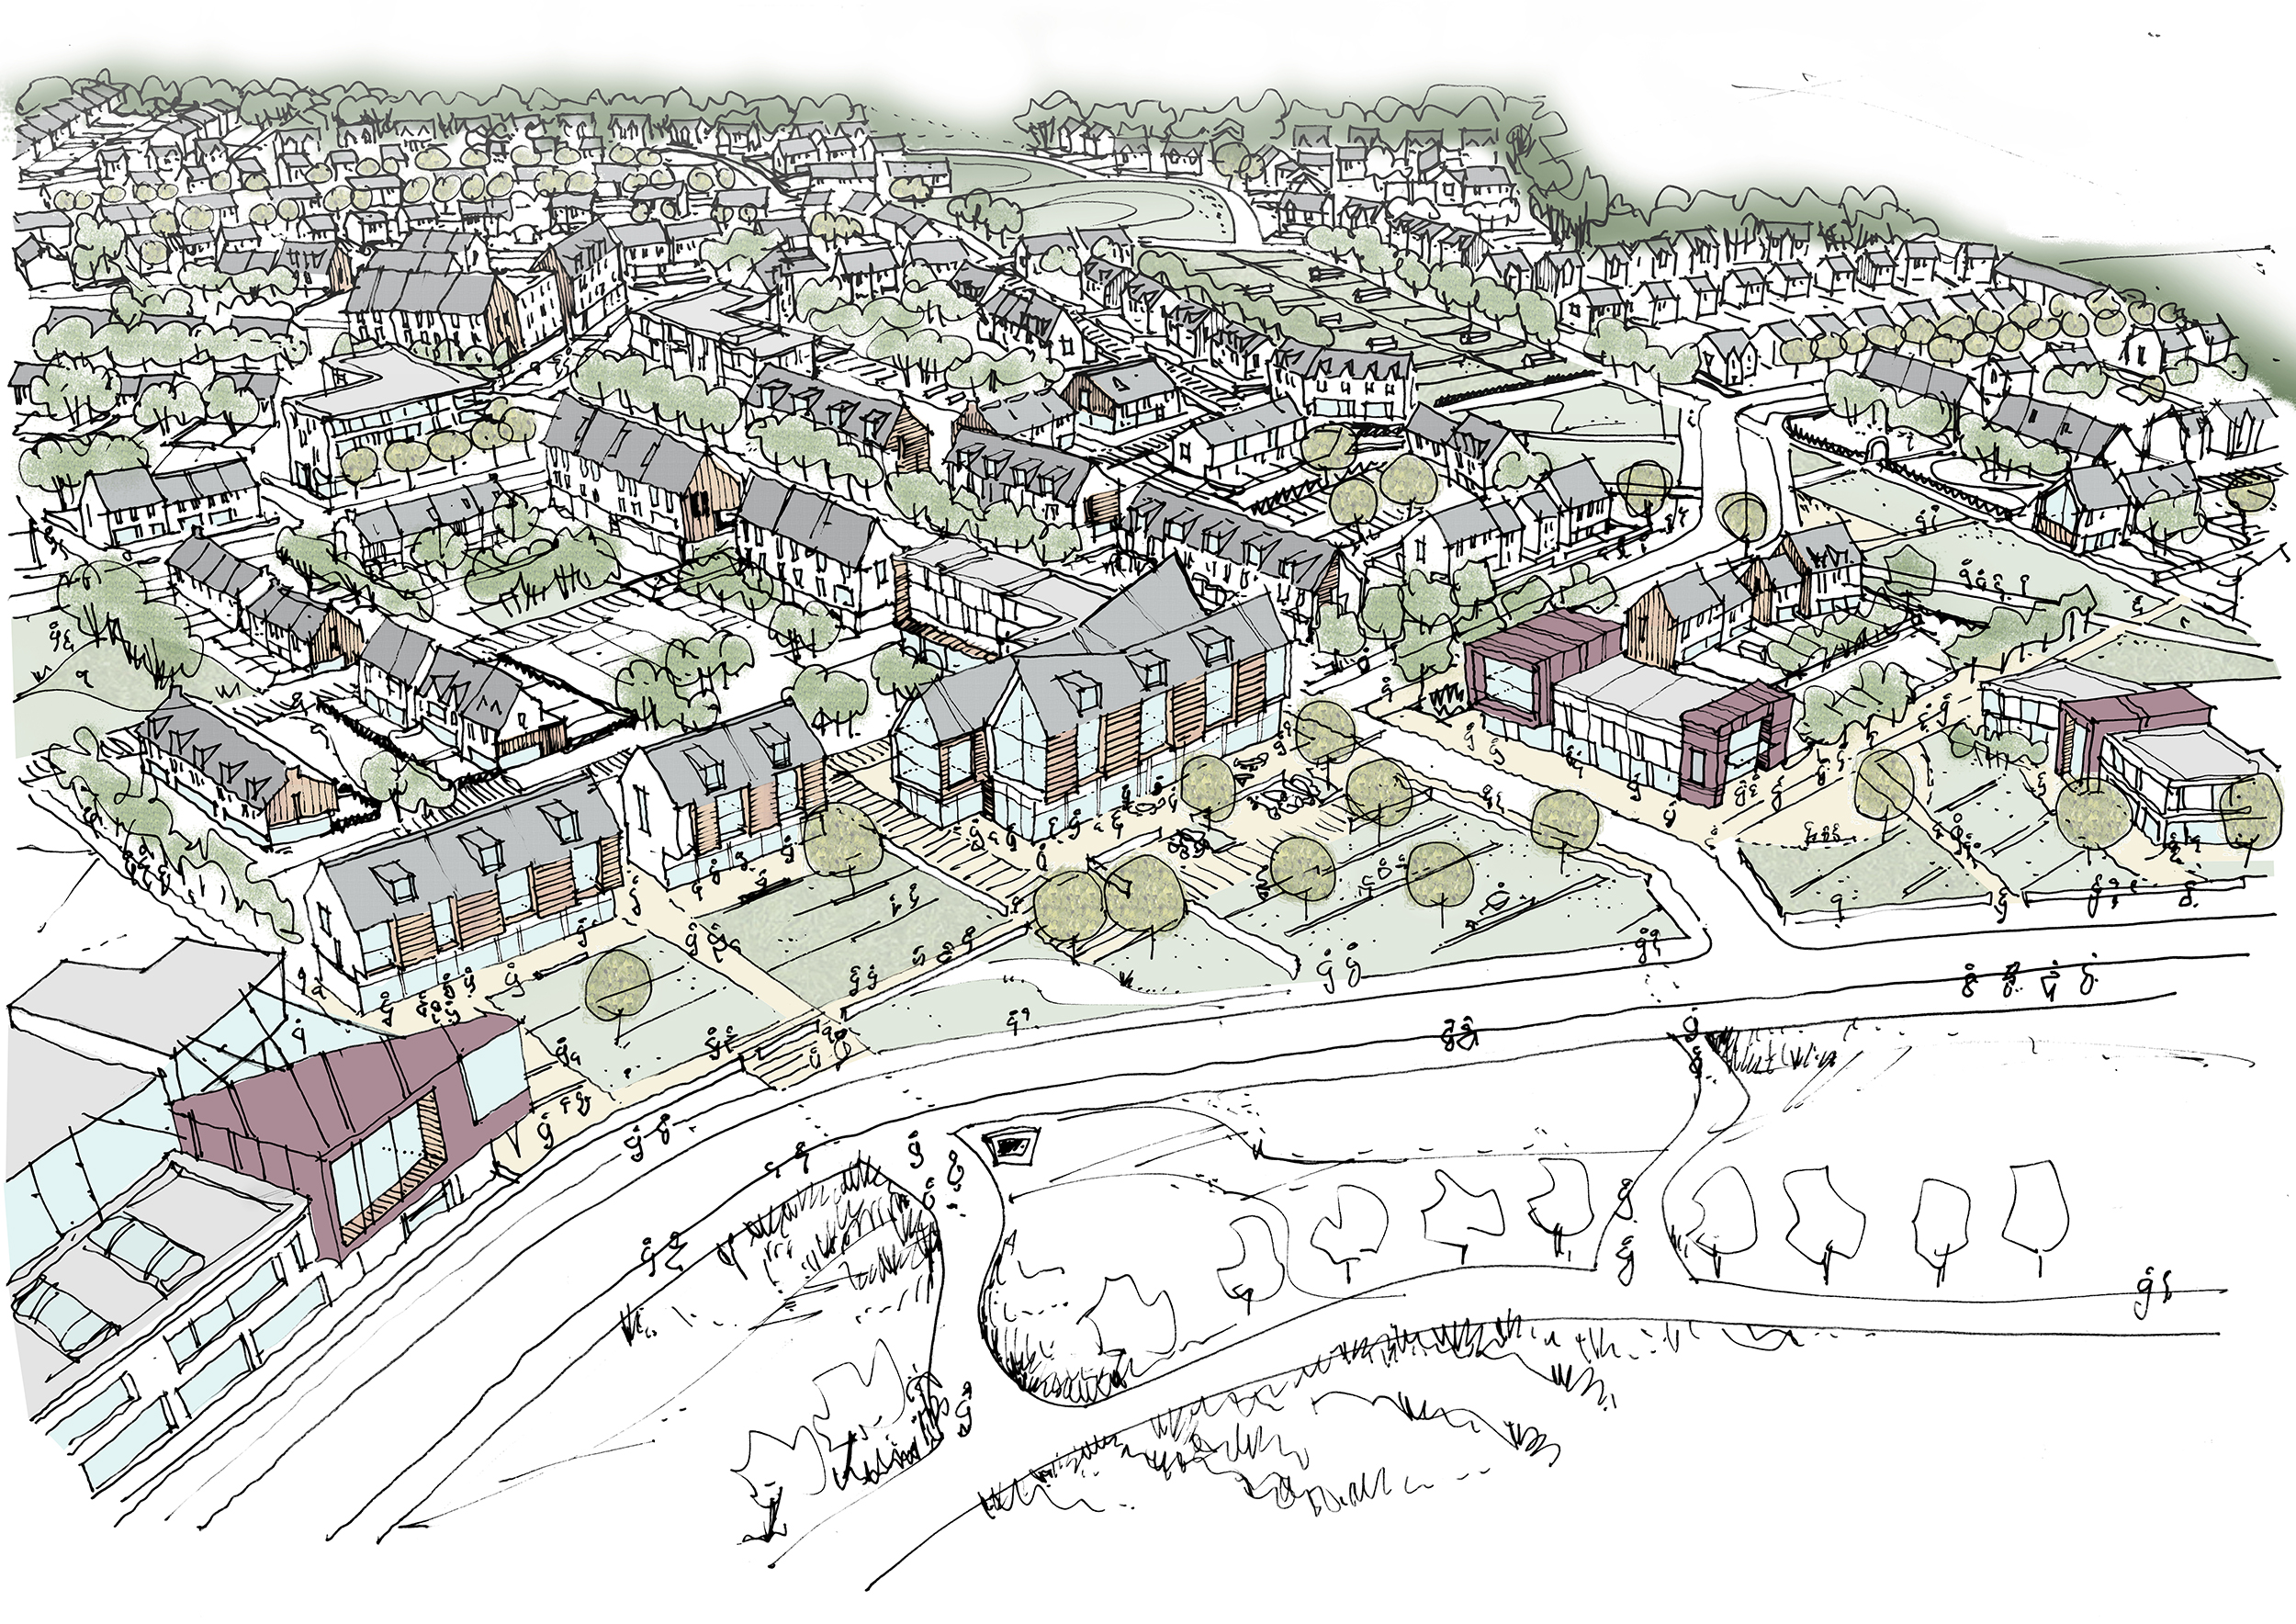 An artist’s impression of the Phase 1b Masterplan, which is looking north over the development.